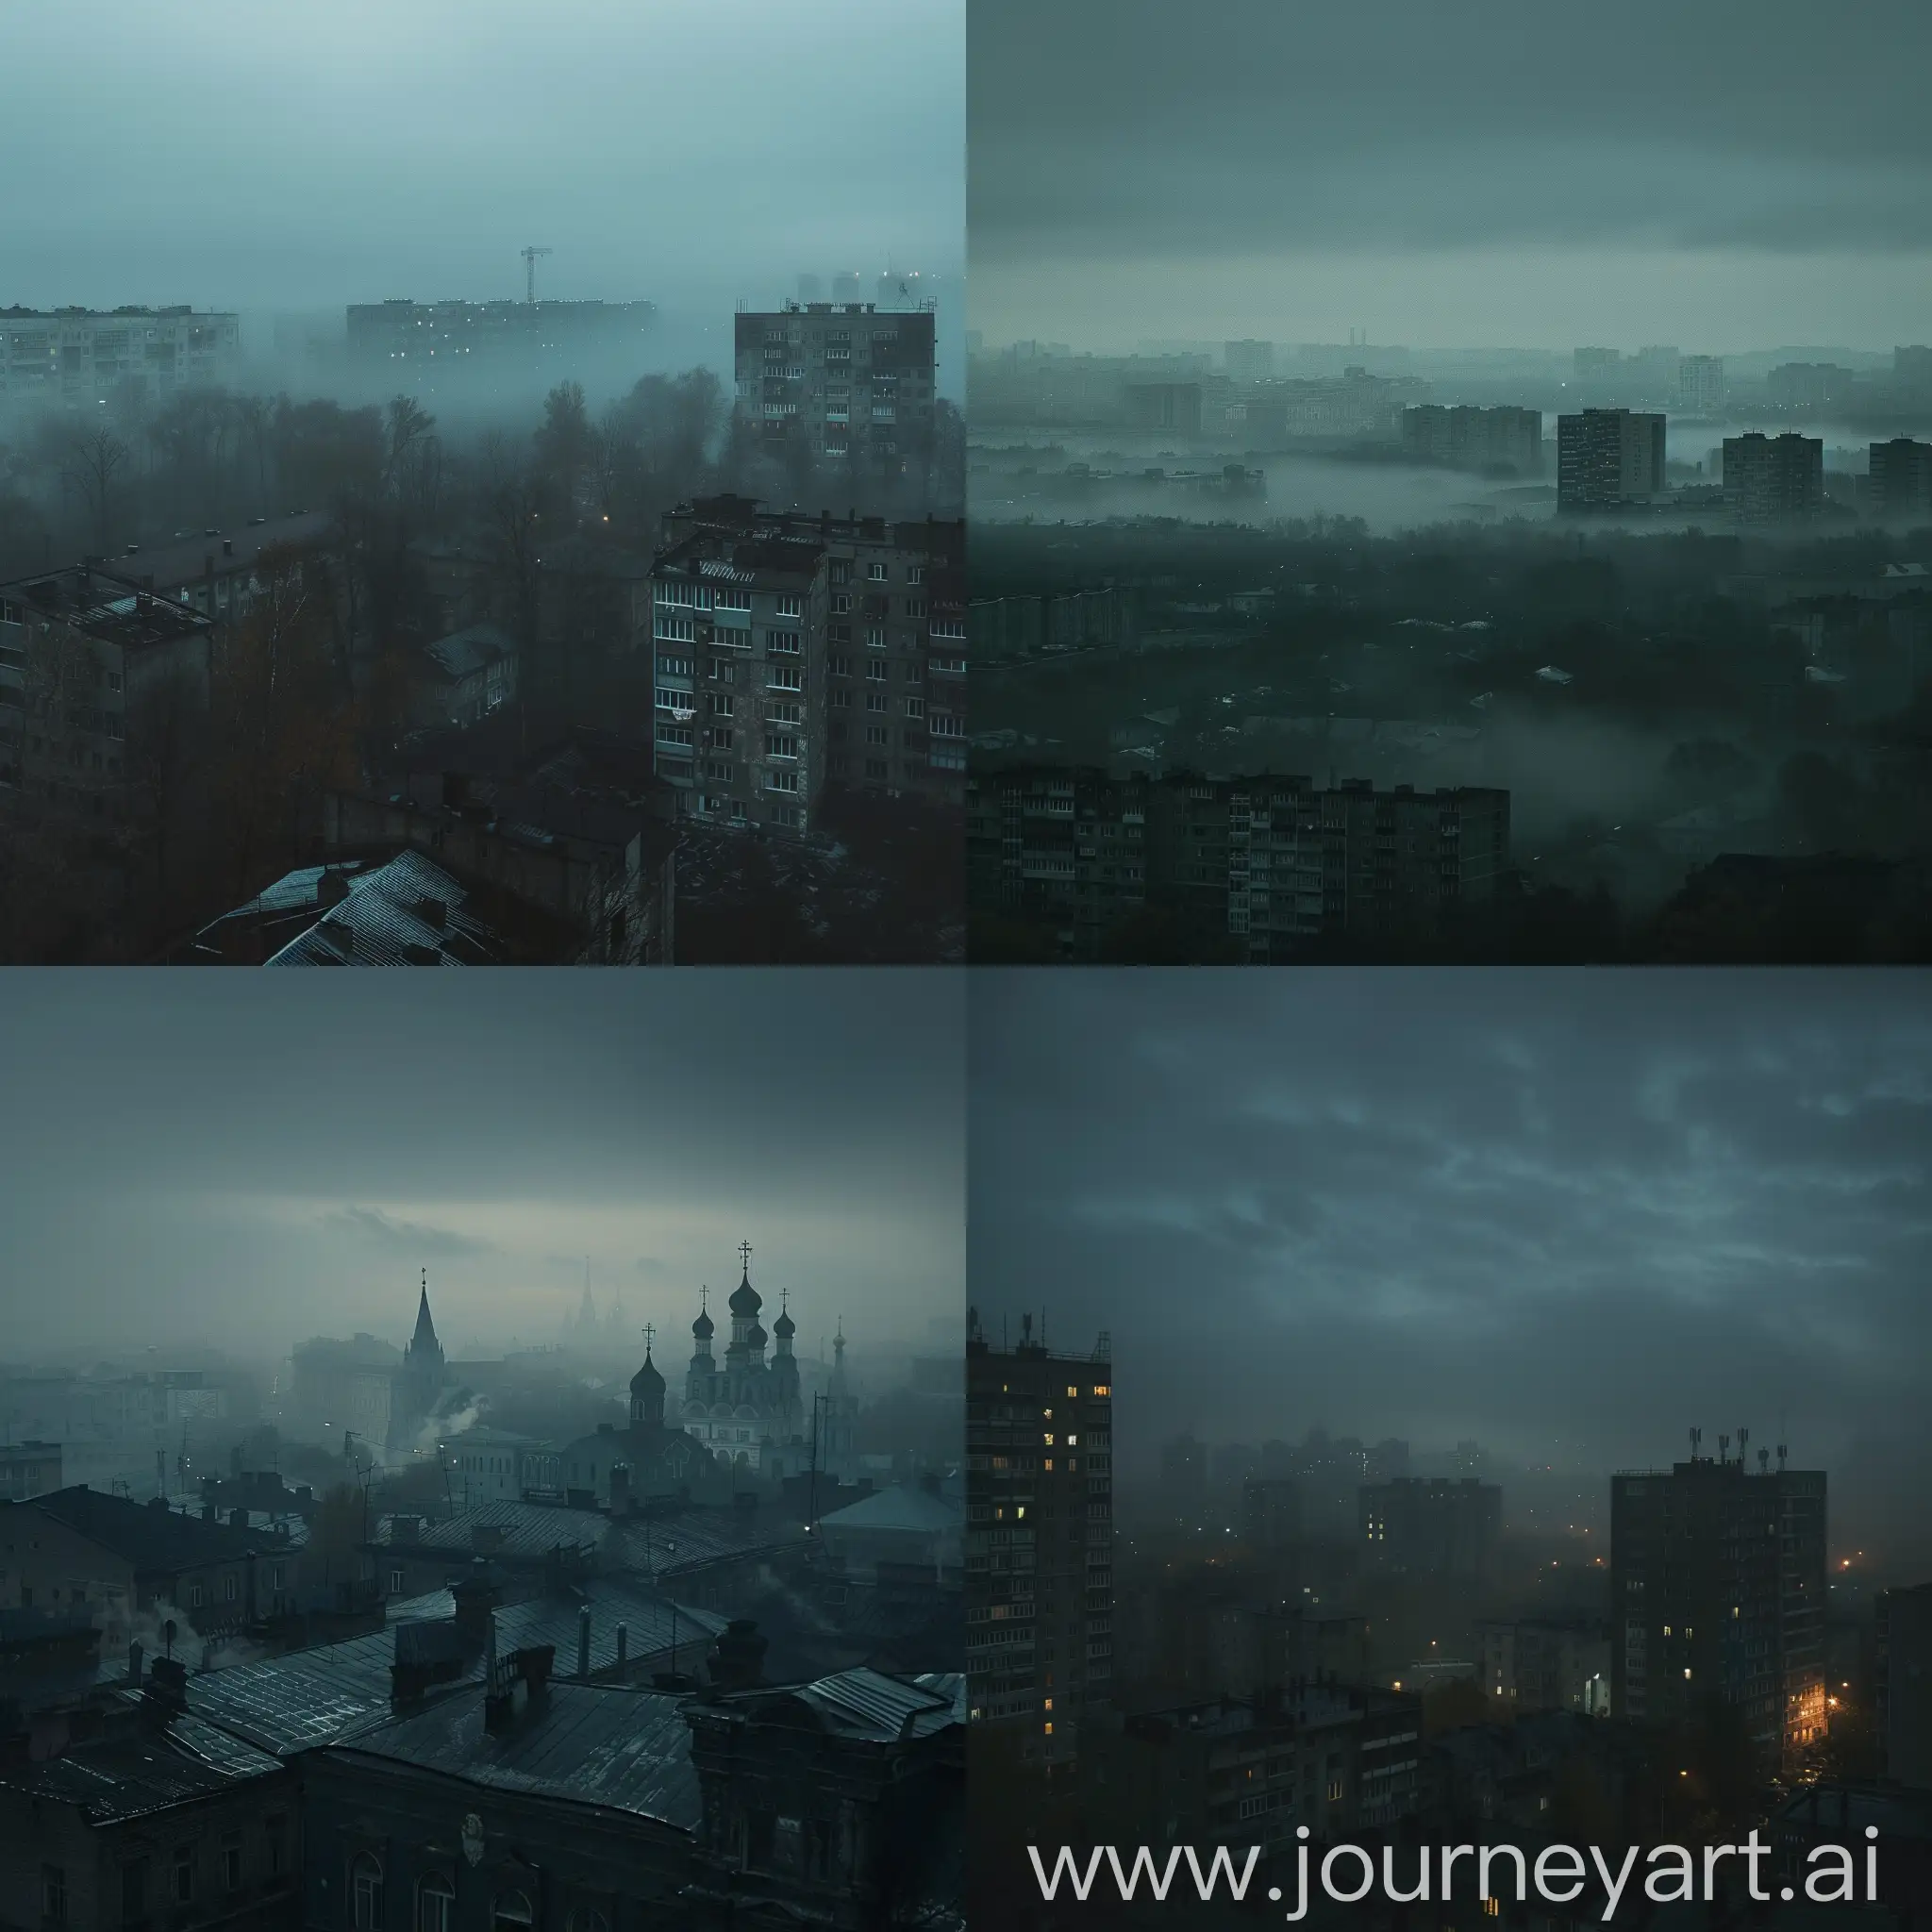 Gloomy-Foggy-Cityscape-of-Russia-at-Night